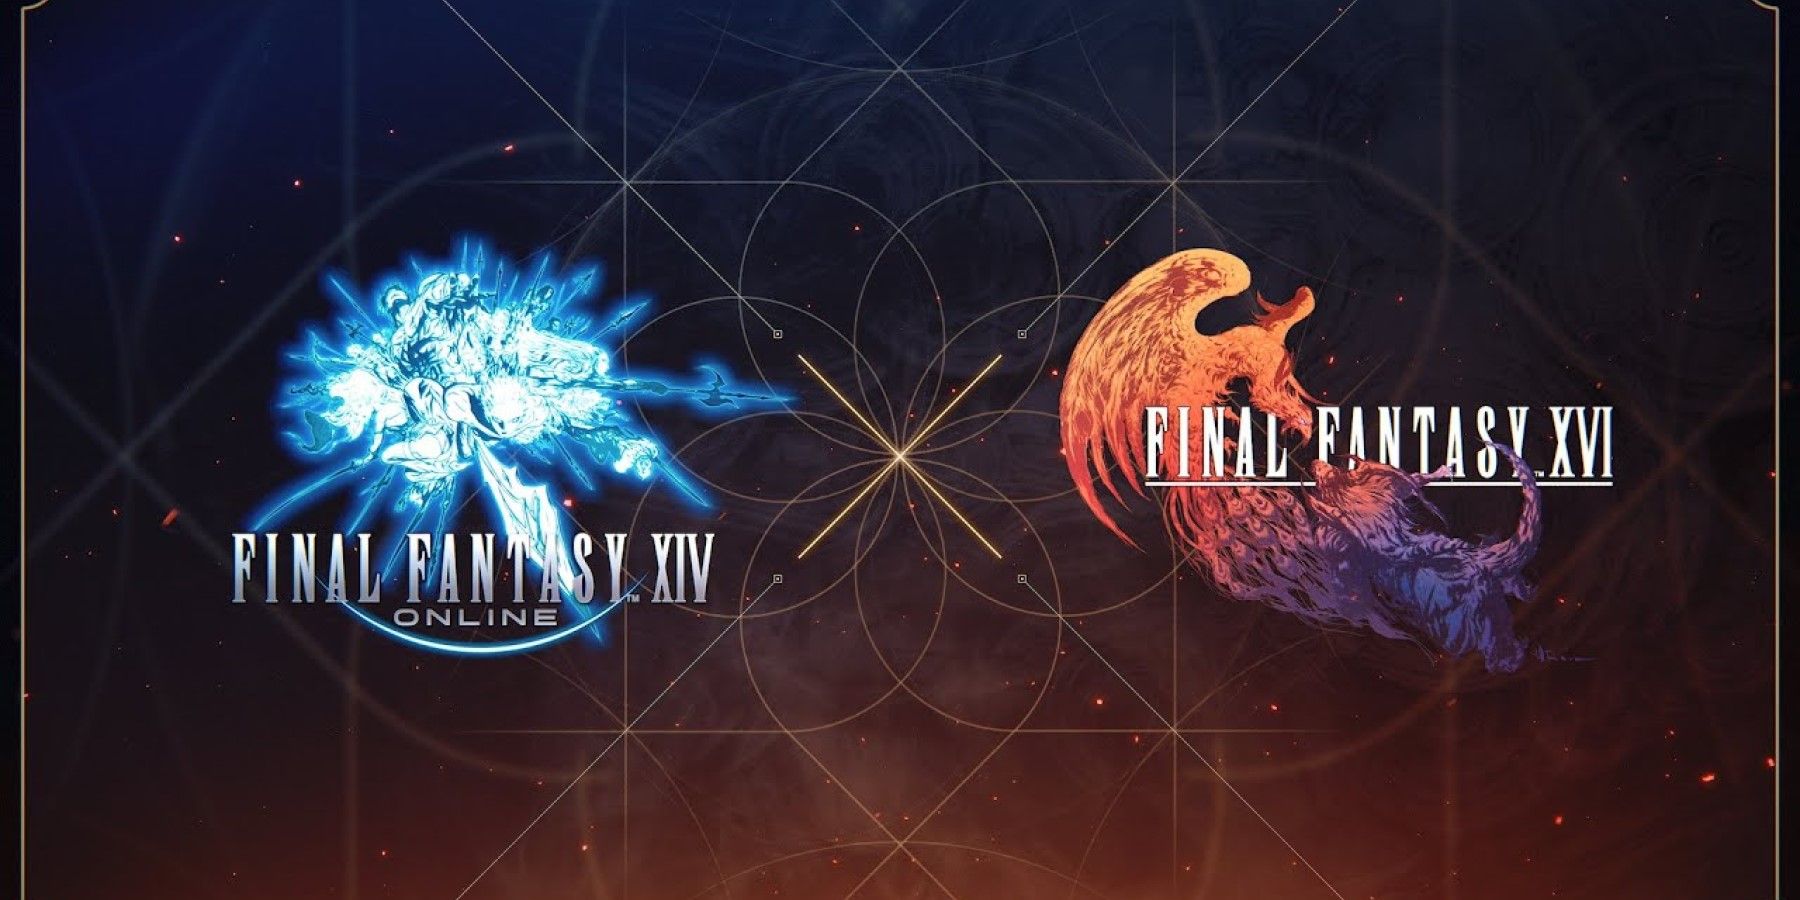 logos for ff14 and ff16 for the collaboration event